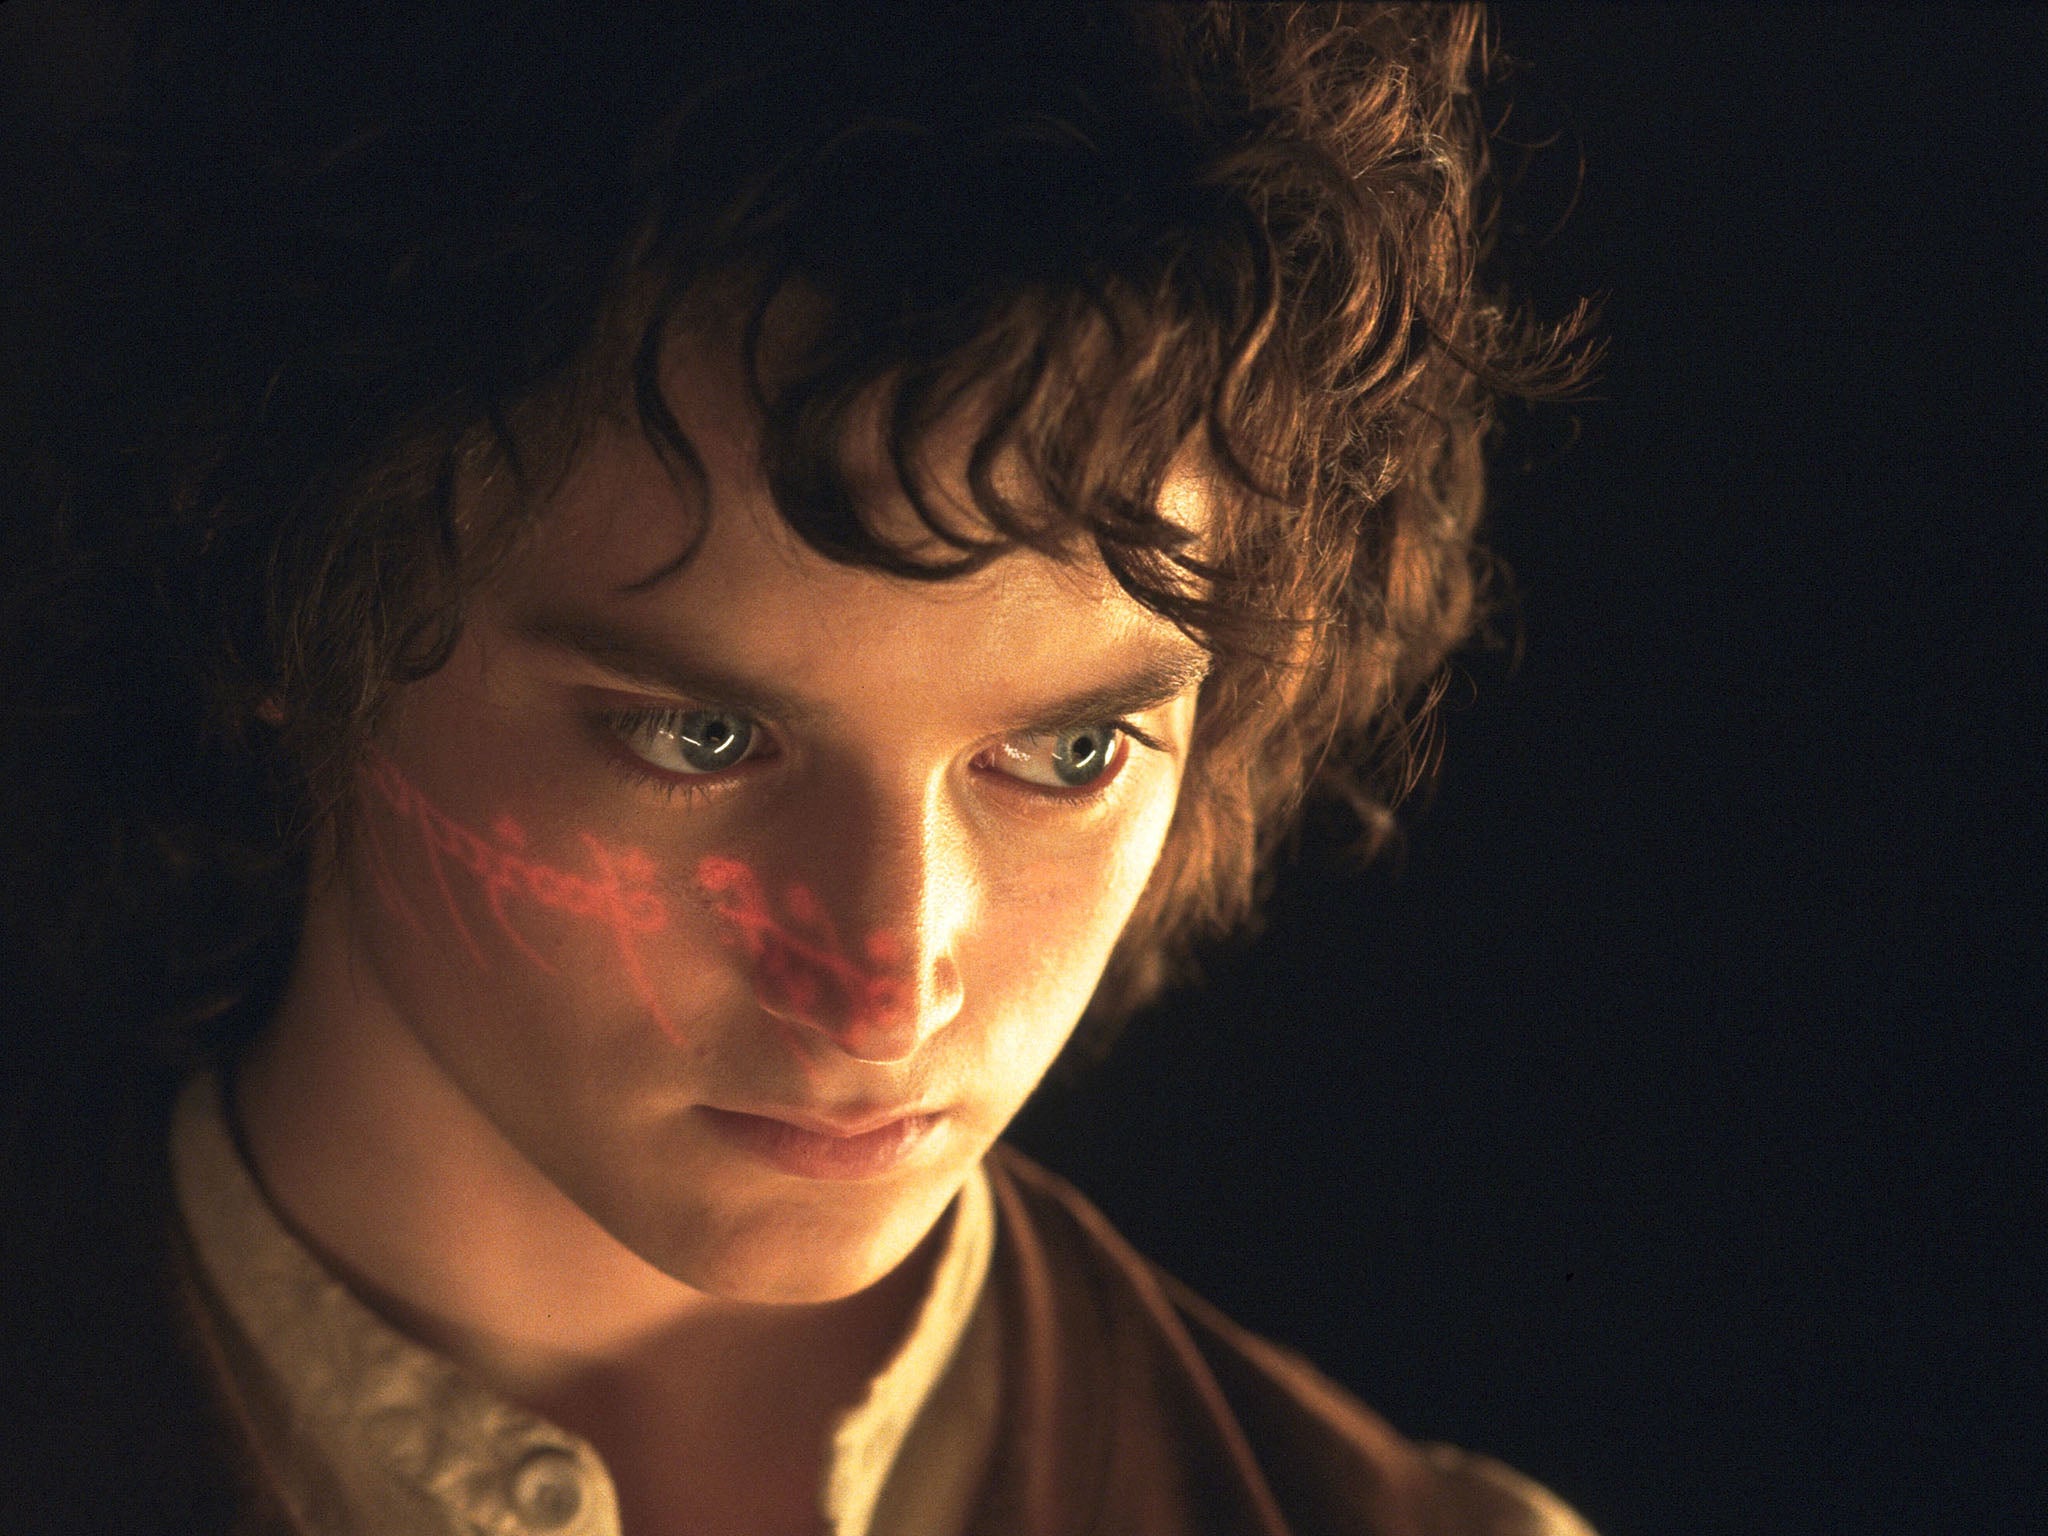 Elijah Wood in ‘The Lord of the Rings’